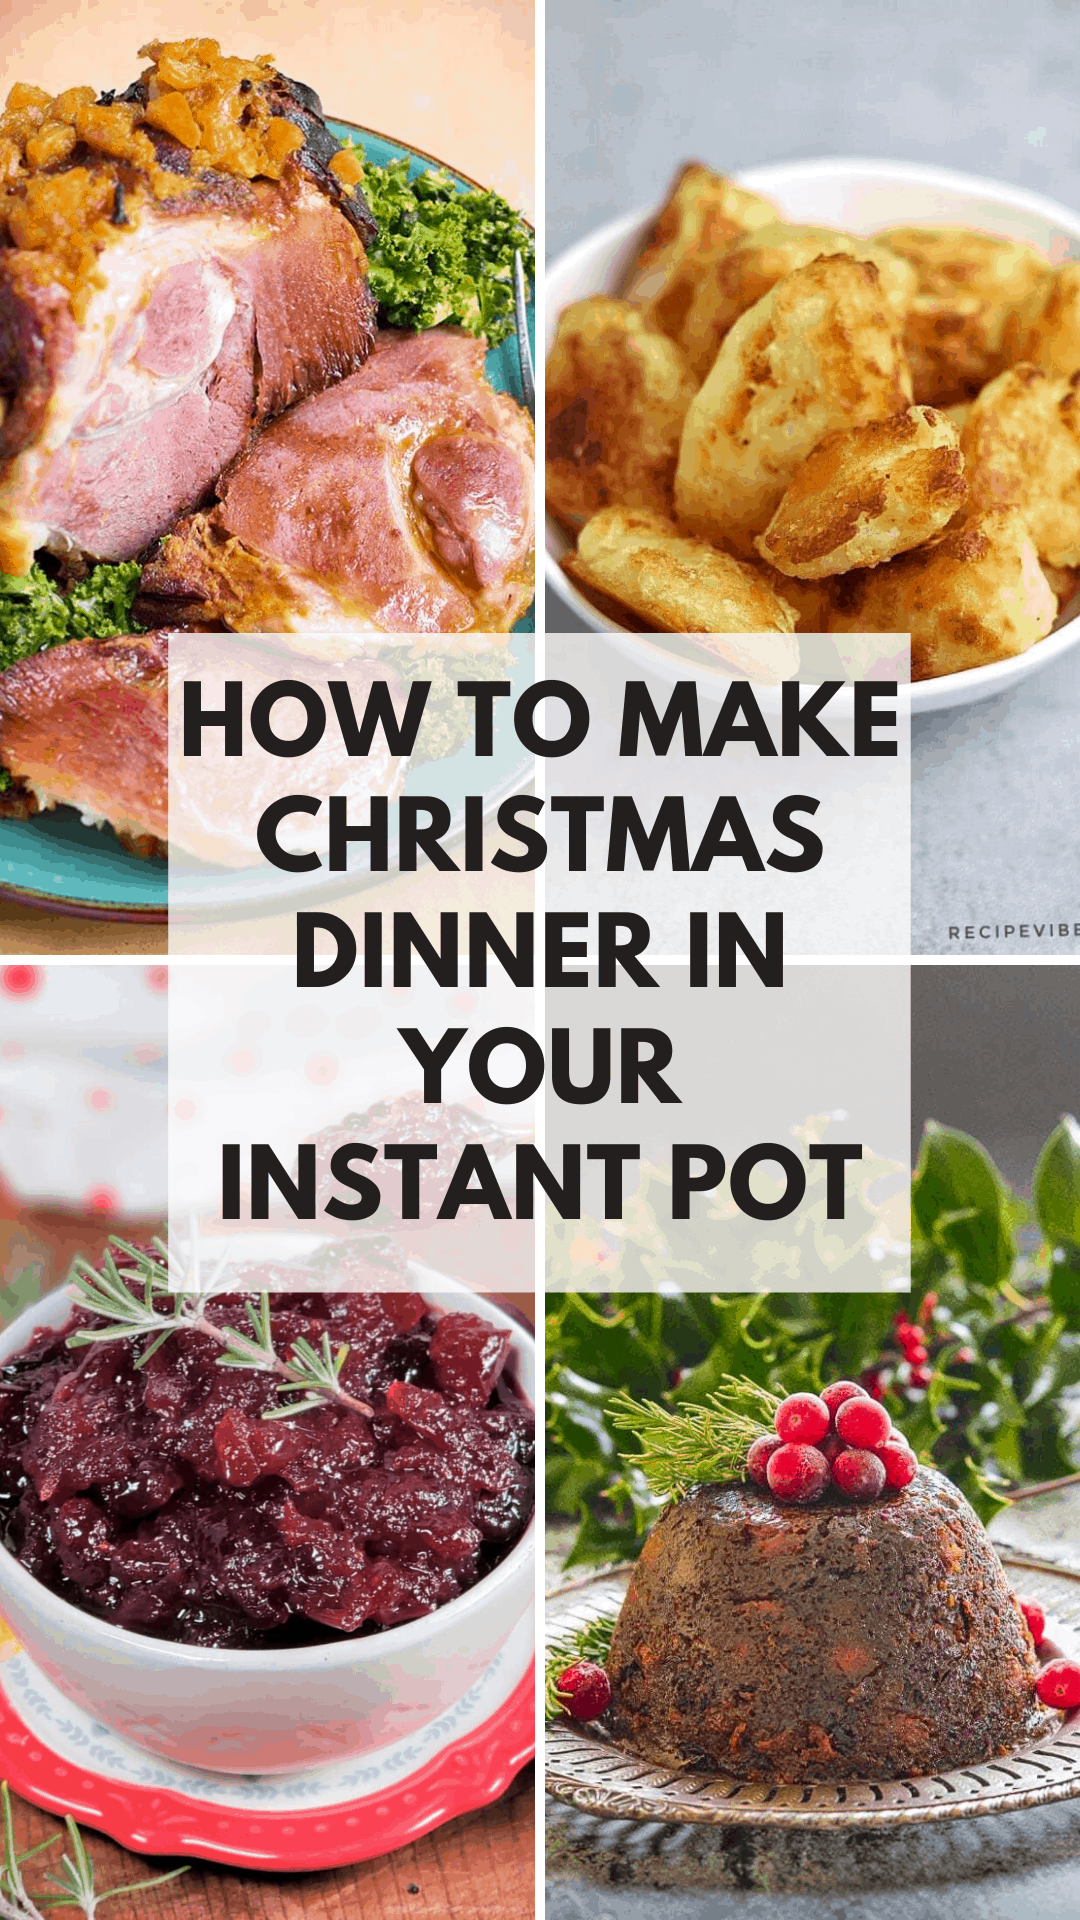 This year take it easy in the kitchen by letting your Instant Pot take care of Christmas dinner! So quick and easy!